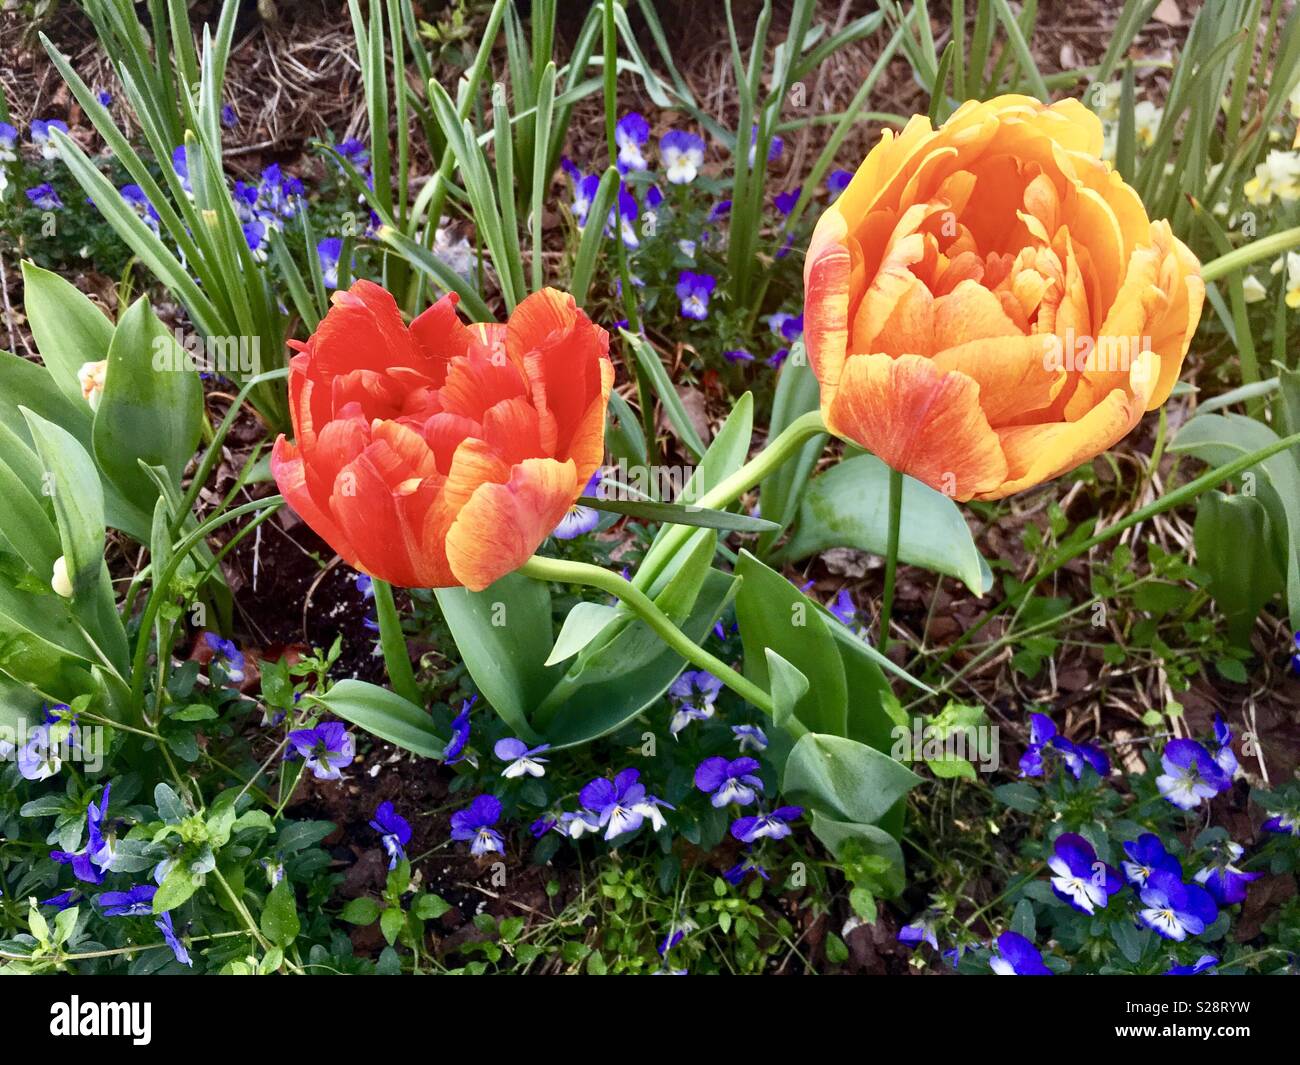 Peony tulips, also known as double tulips, growing amid purple flowers in spring. Stock Photo